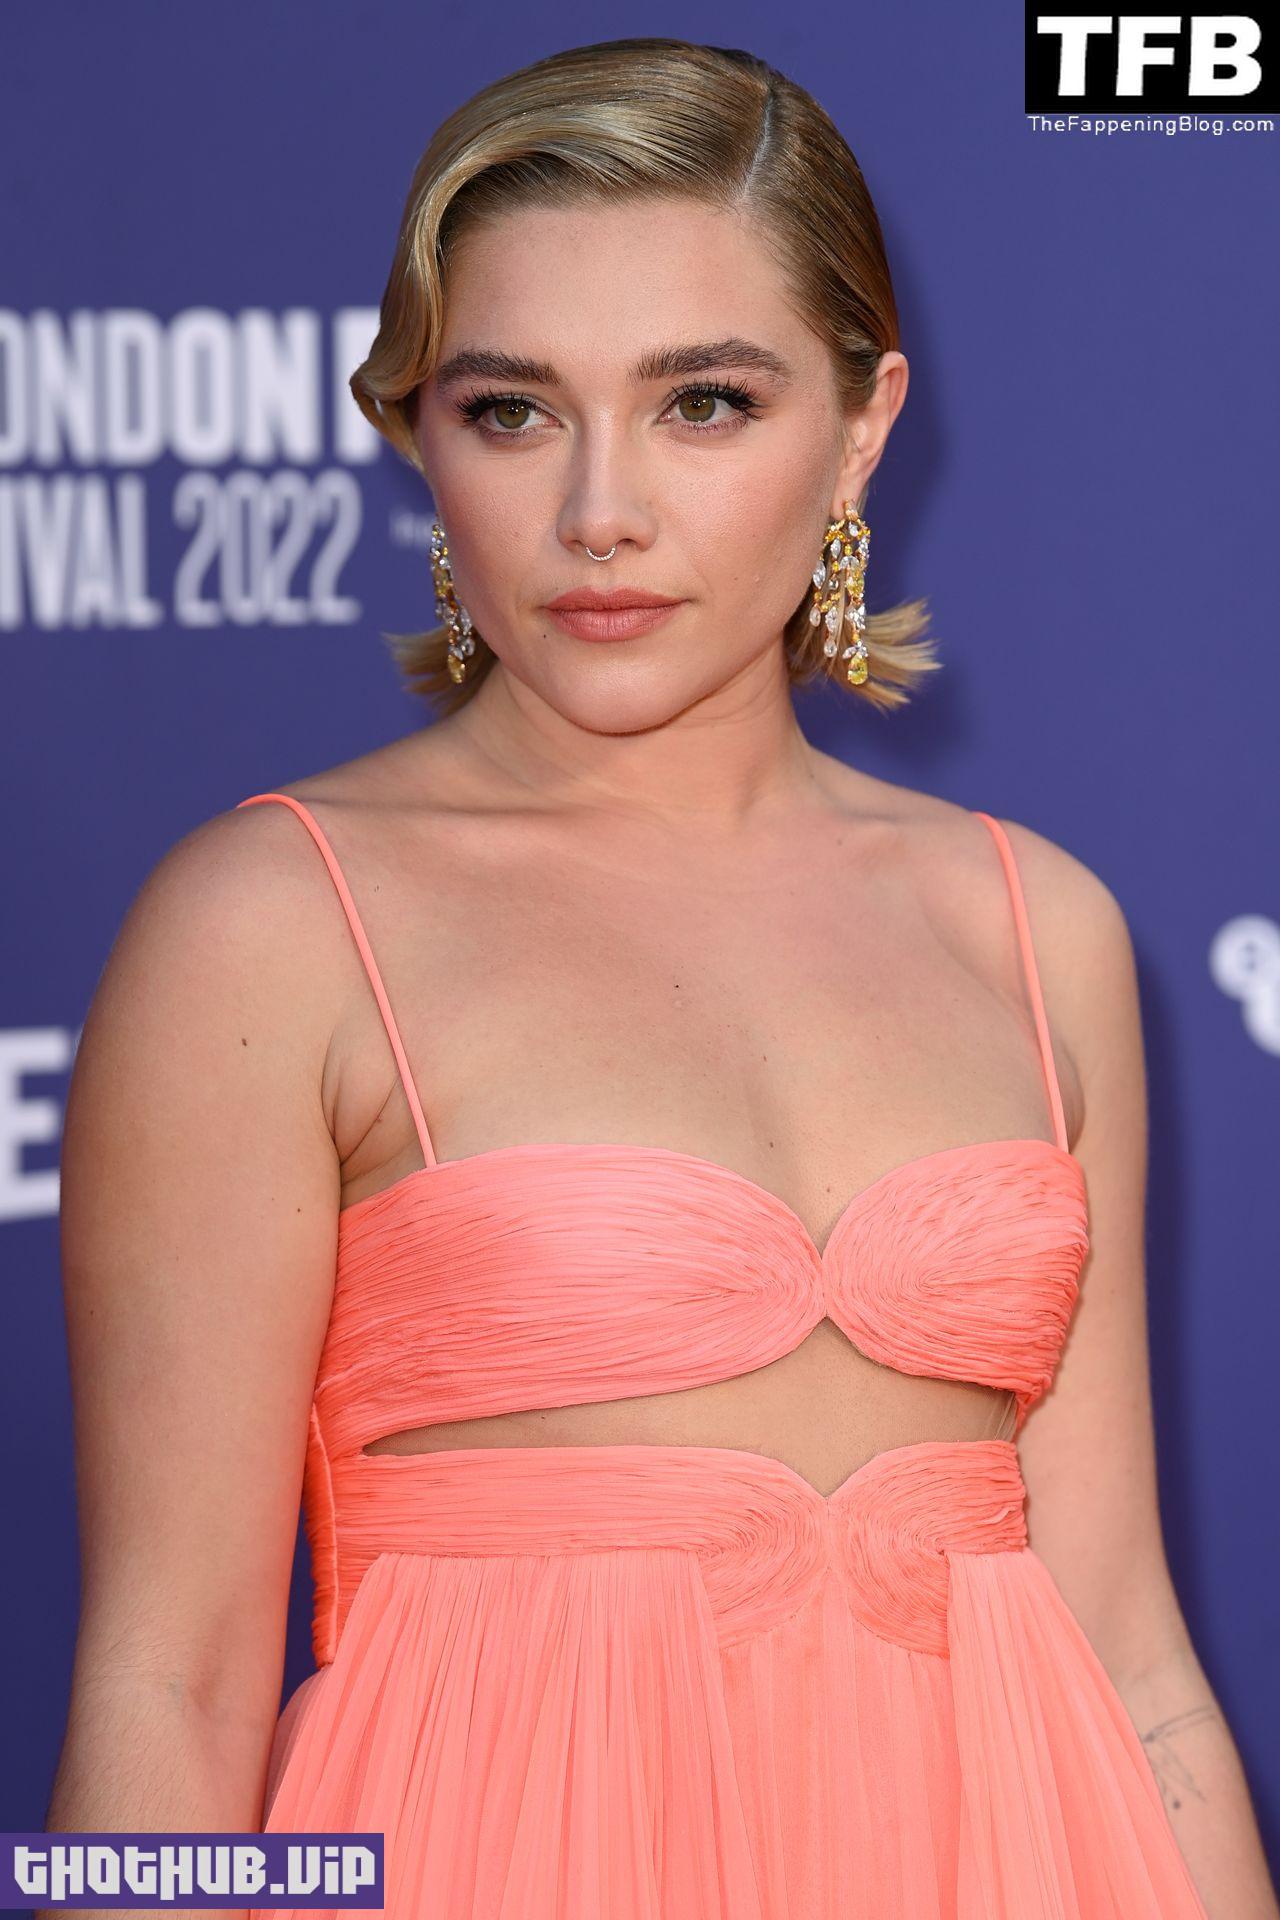 Florence Pugh Sexy The Fappening Blog 66 1